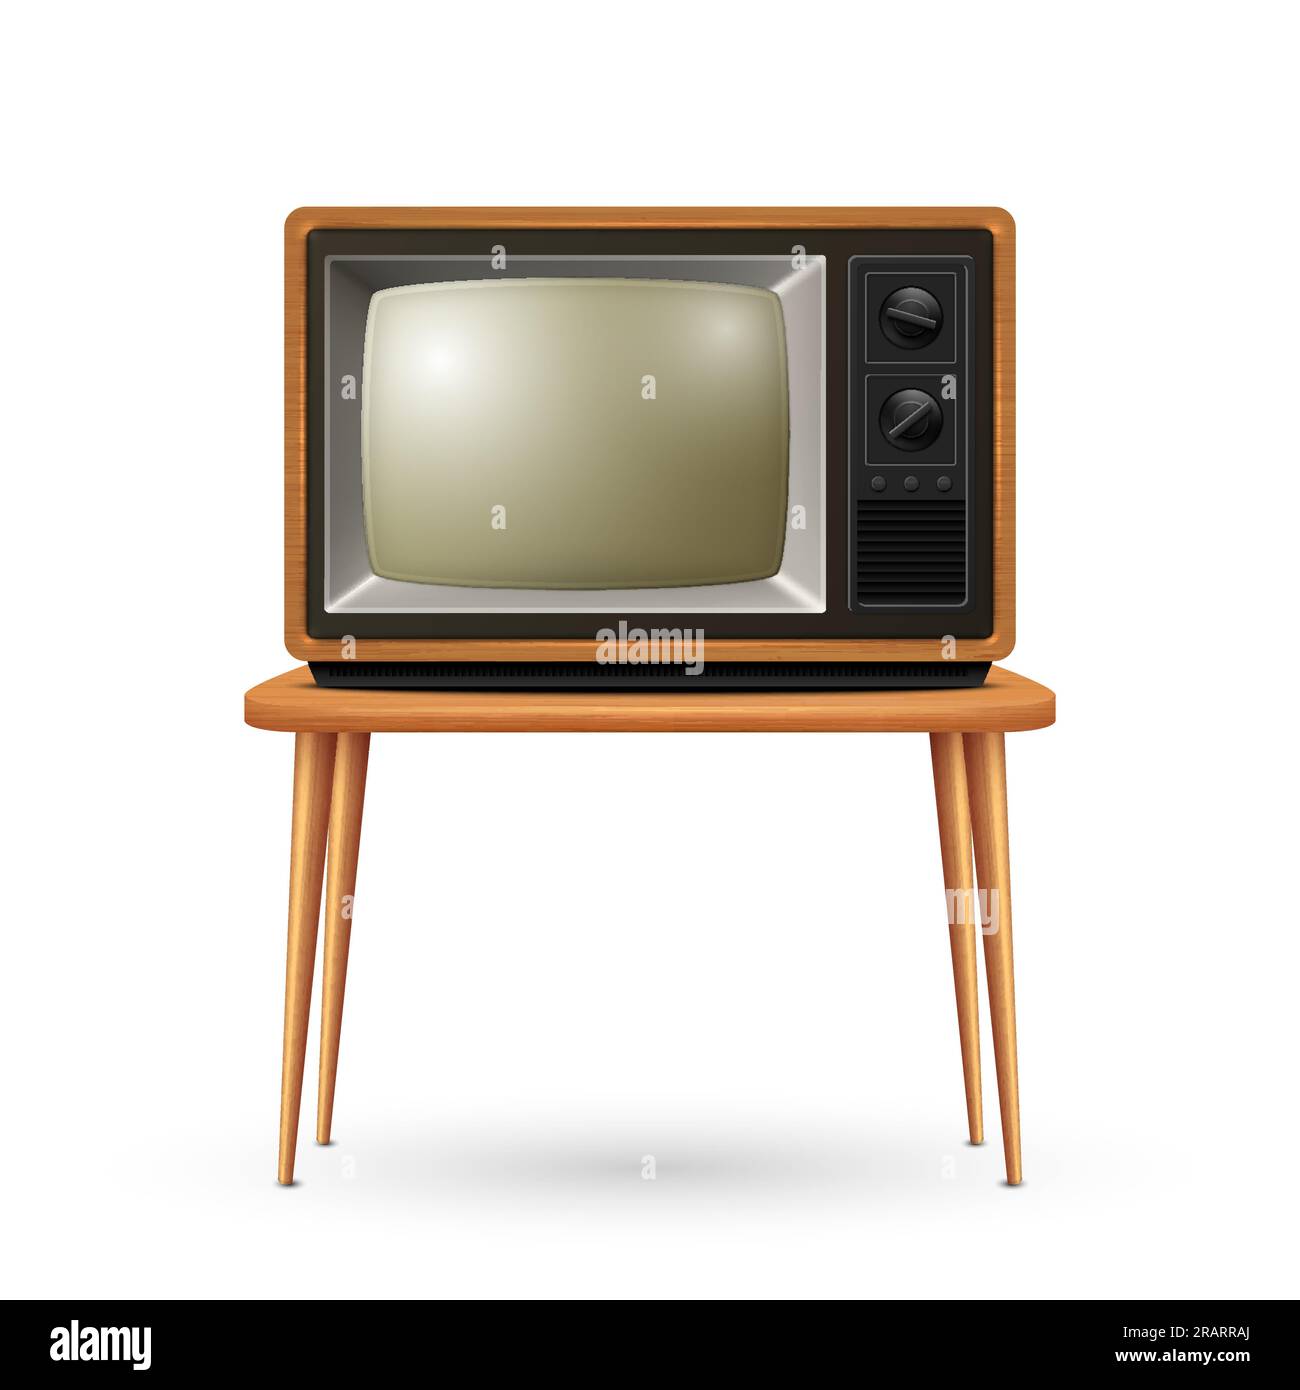 Vector 3d Realistic Retro TV Receiver Isolated on White Background. Home Interior Design Concept. Vintage TV Set, Television, Front View Stock Vector